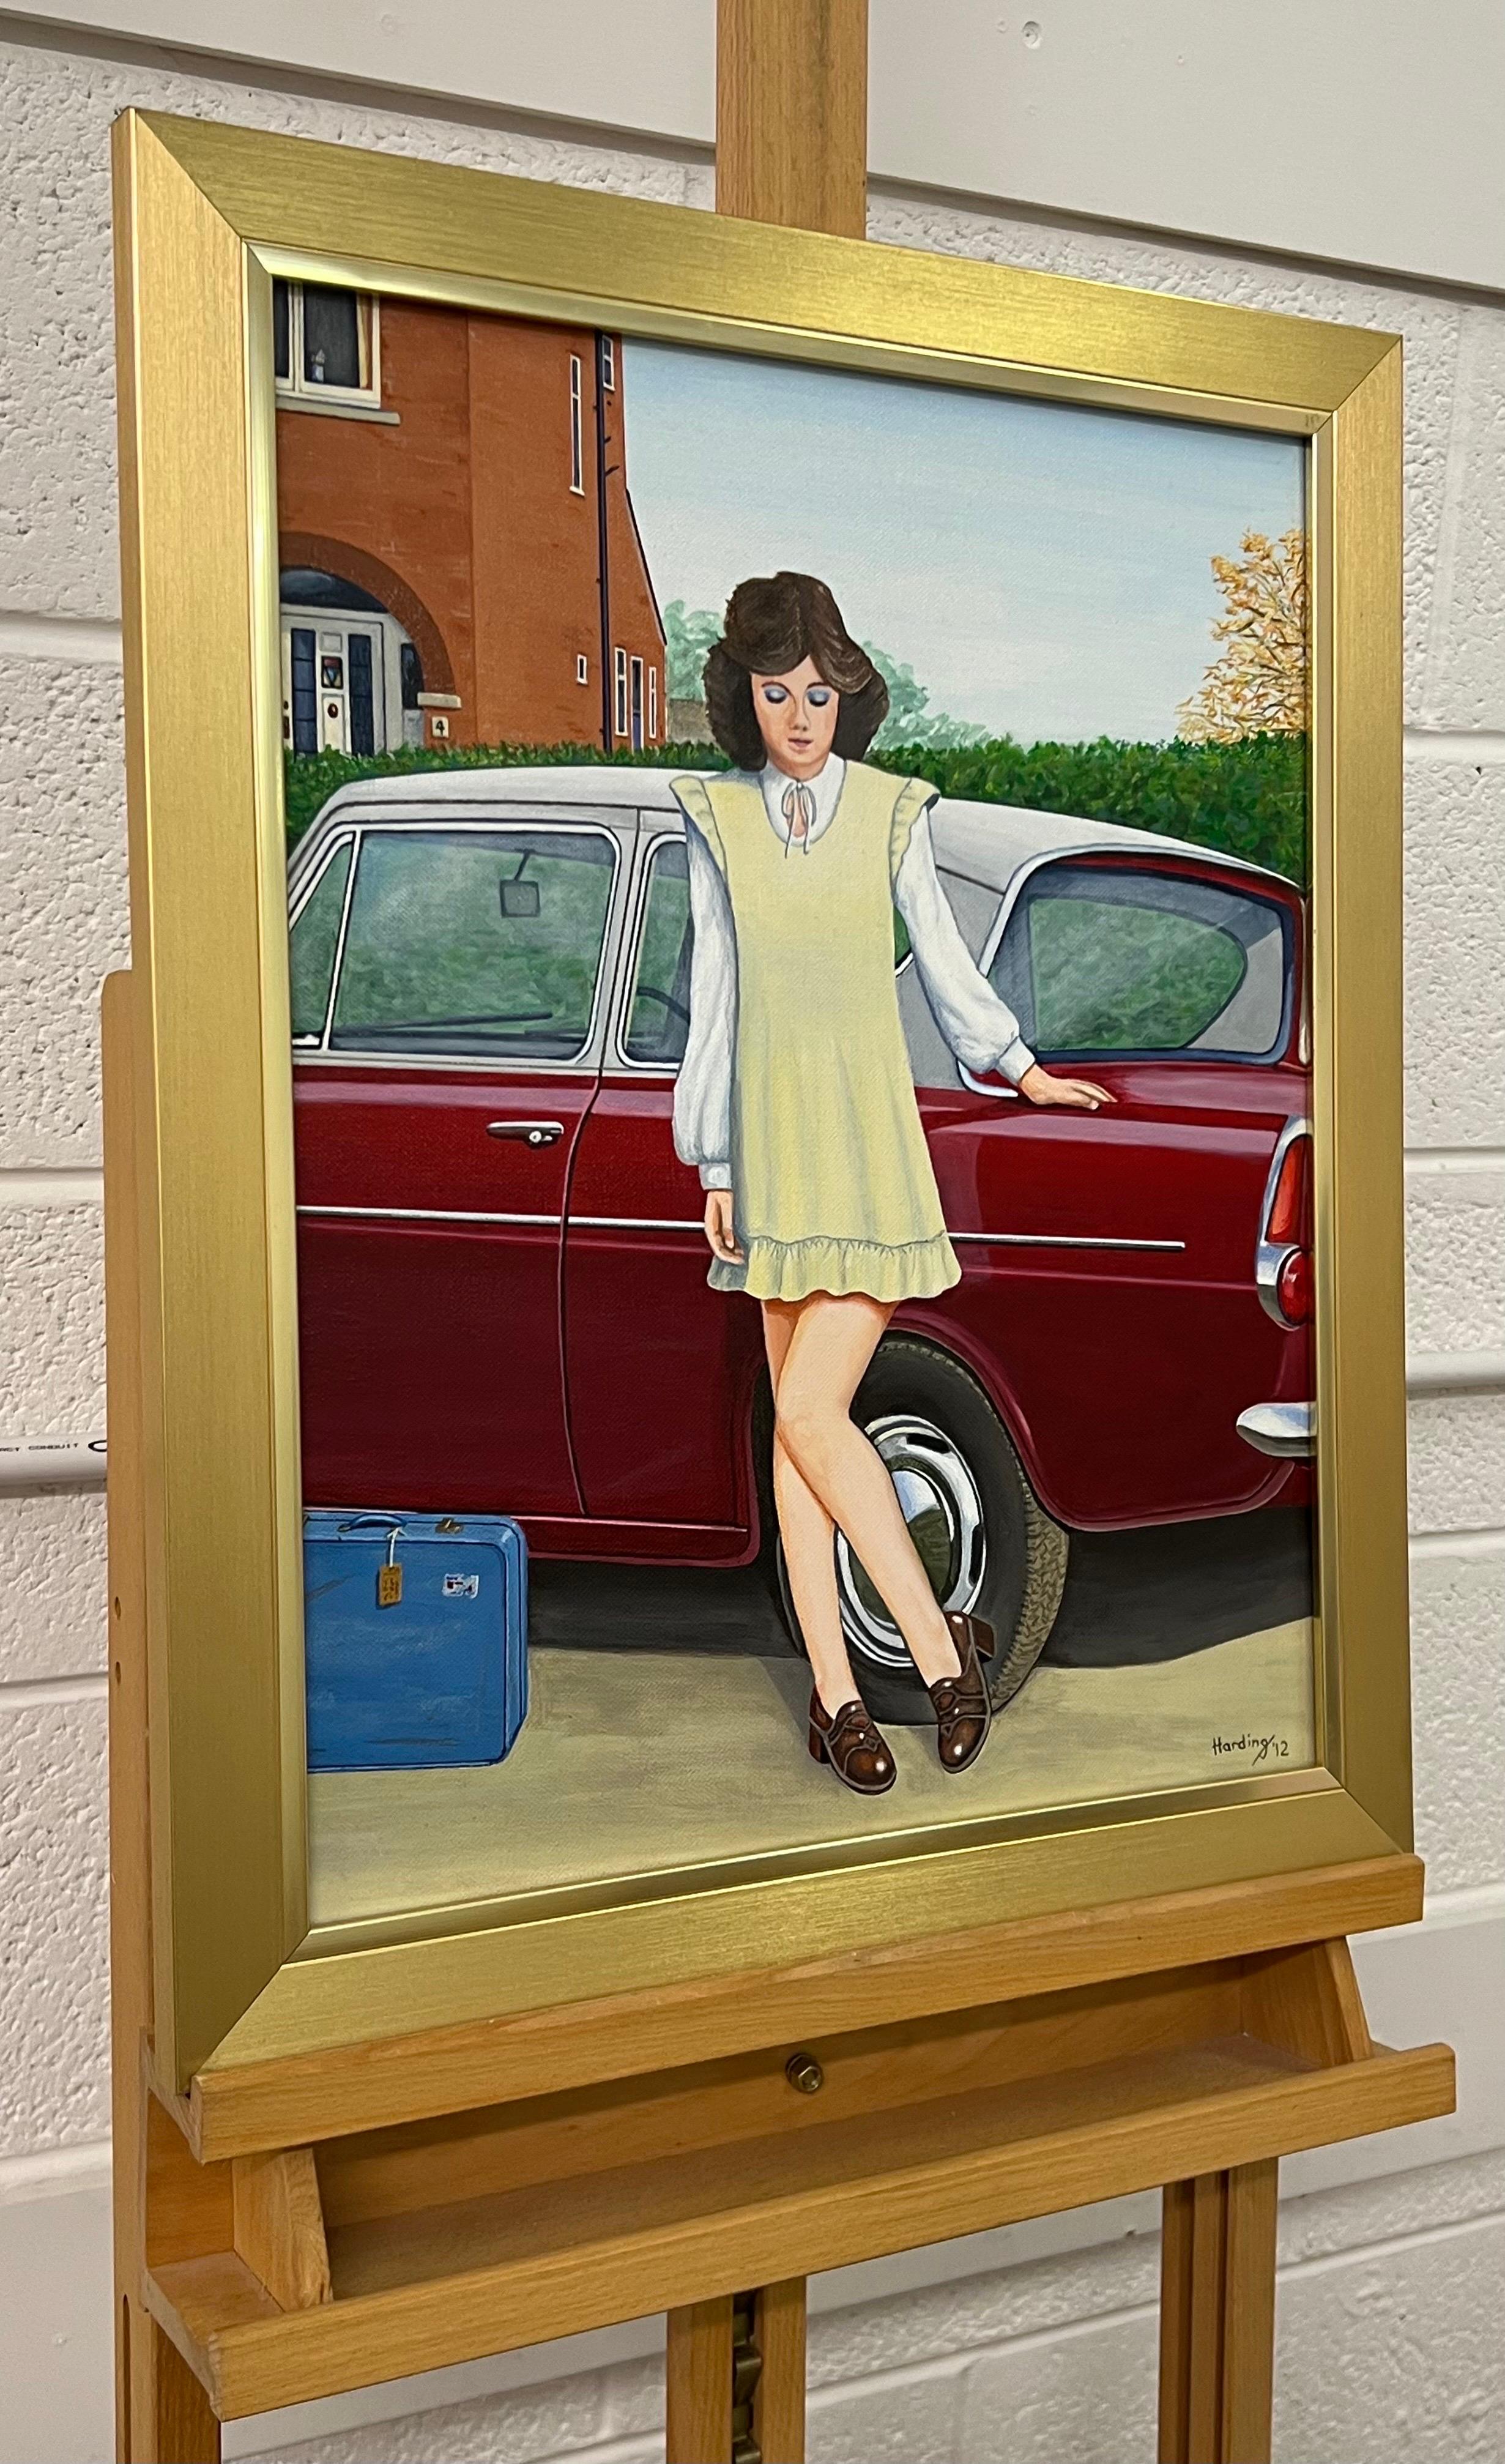 Vintage Englisch Frau in Suburbia mit Classic Ford Auto 1960's 1970's England  – Painting von Paul F Harding